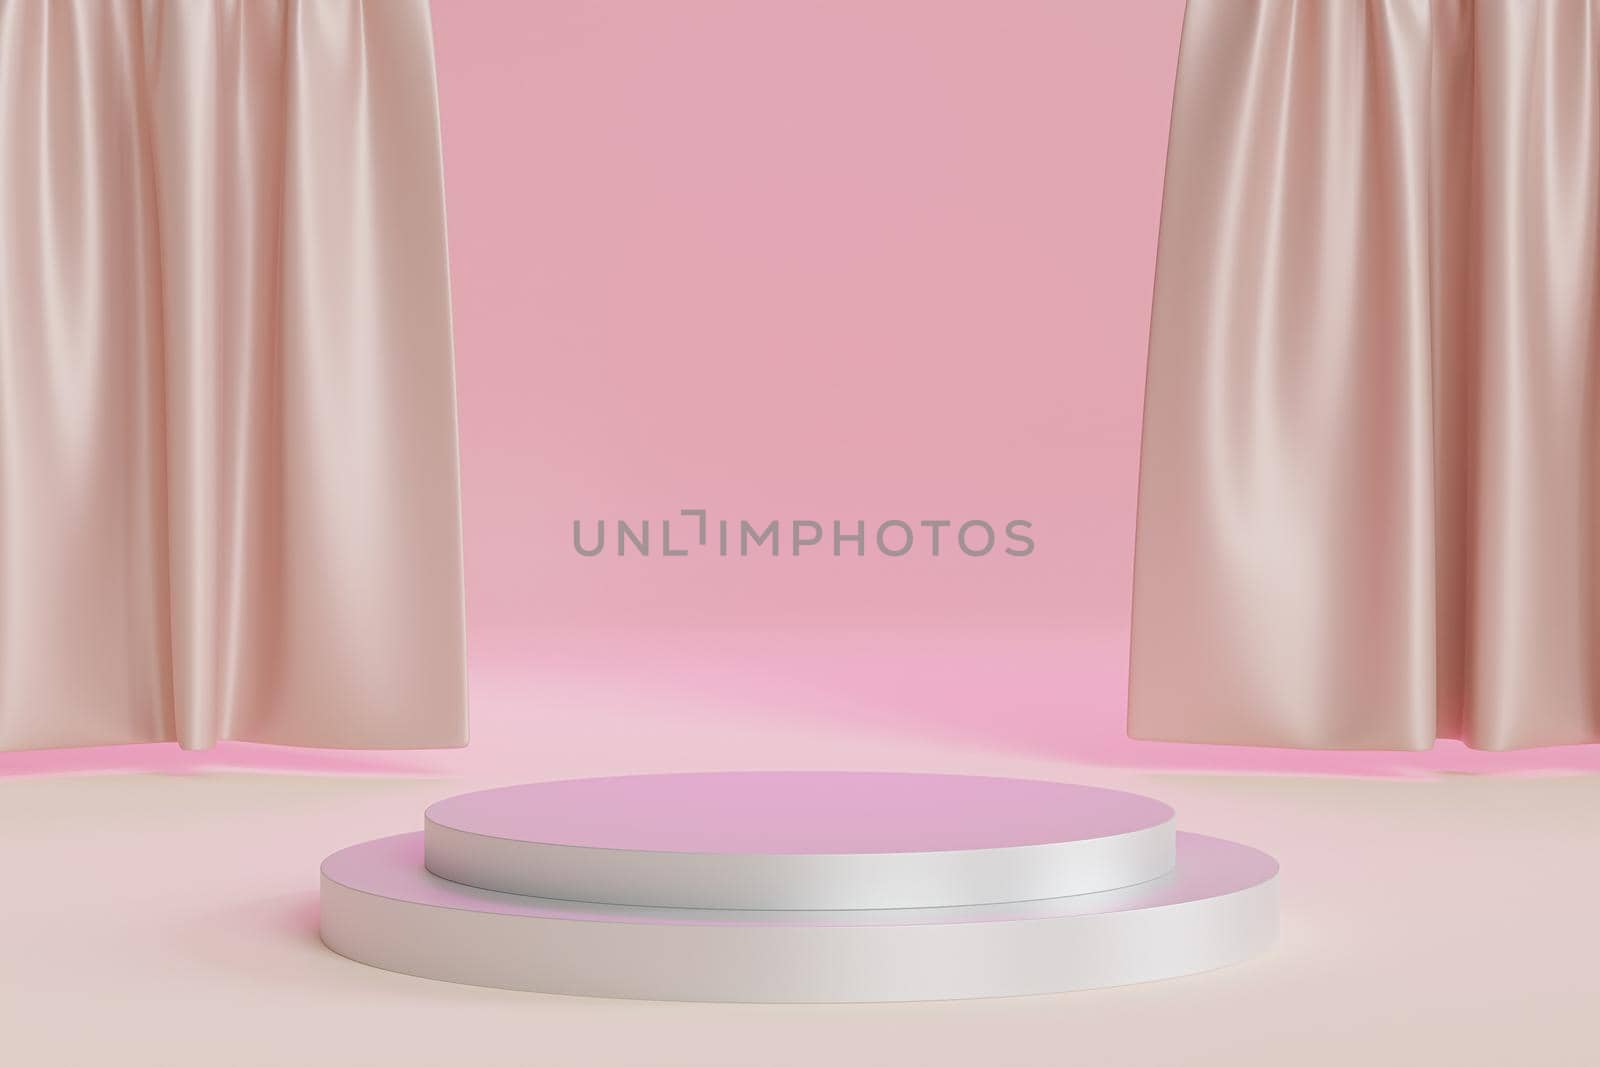 Cylinder podium or pedestal for products or advertising on shiny beige curtains background, minimal 3d illustration render by Frostroomhead